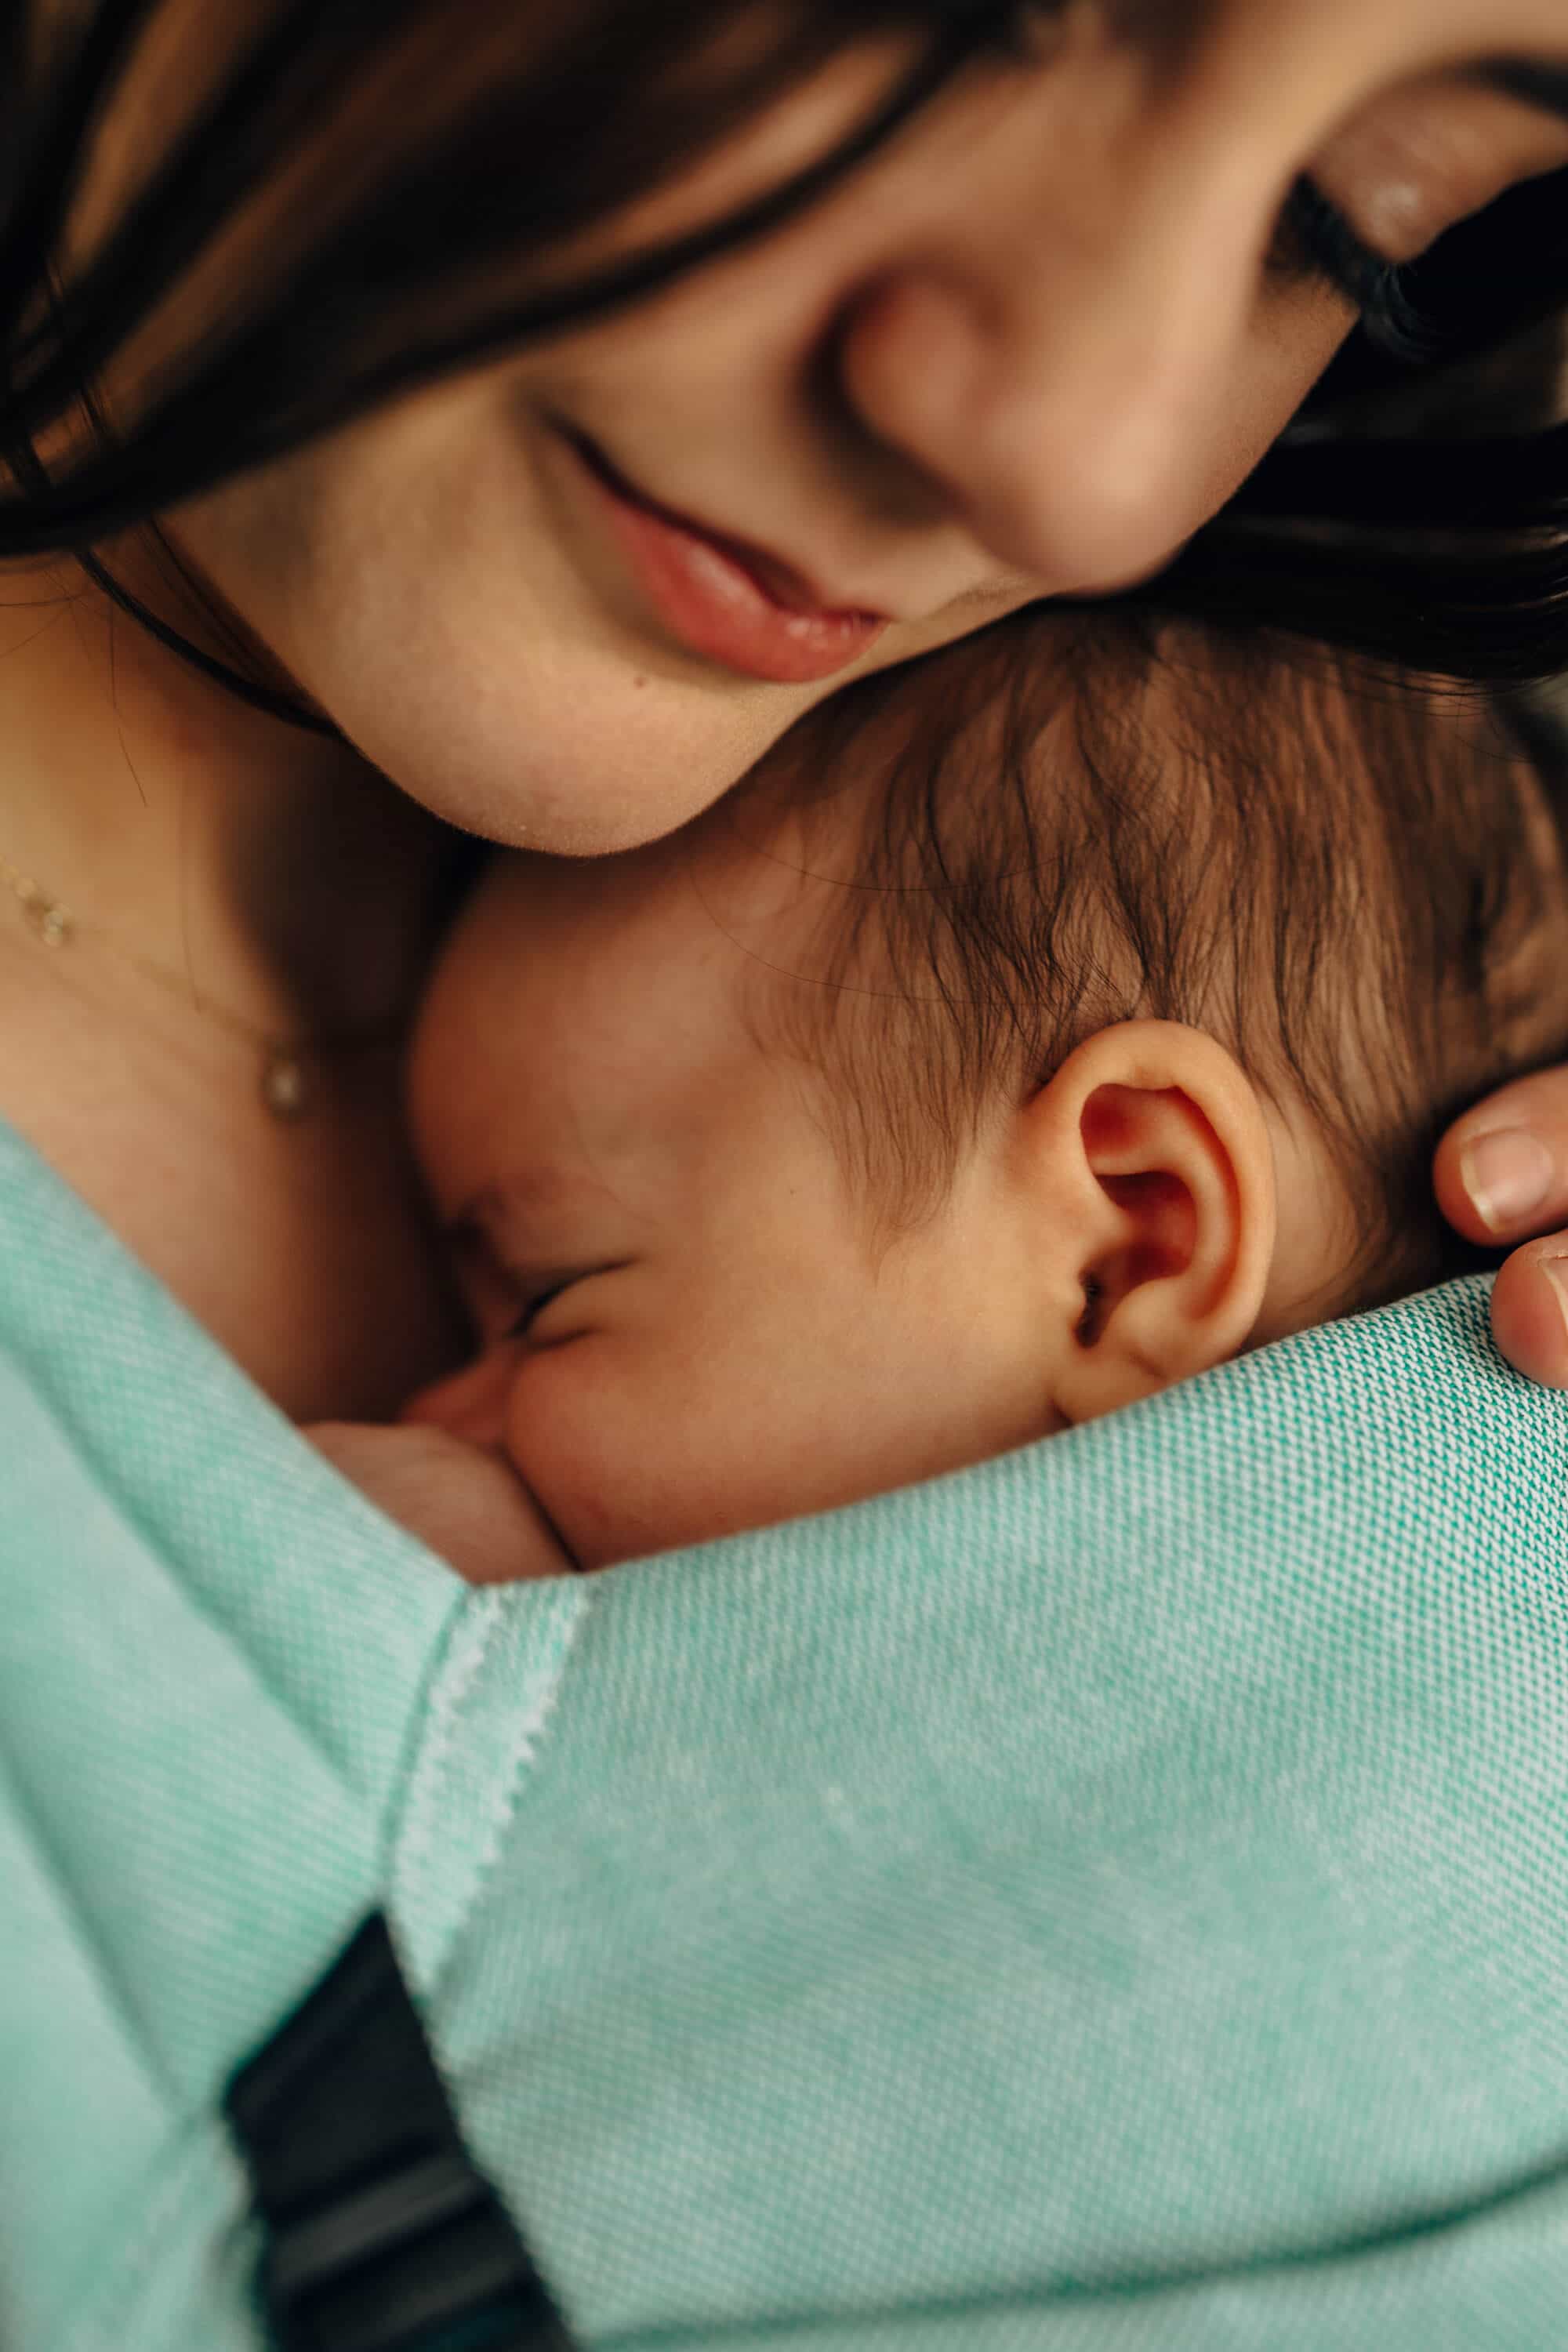 A closeup shot a woman with brown hair snuggling her young baby in a Lennylight Agave baby carrier.